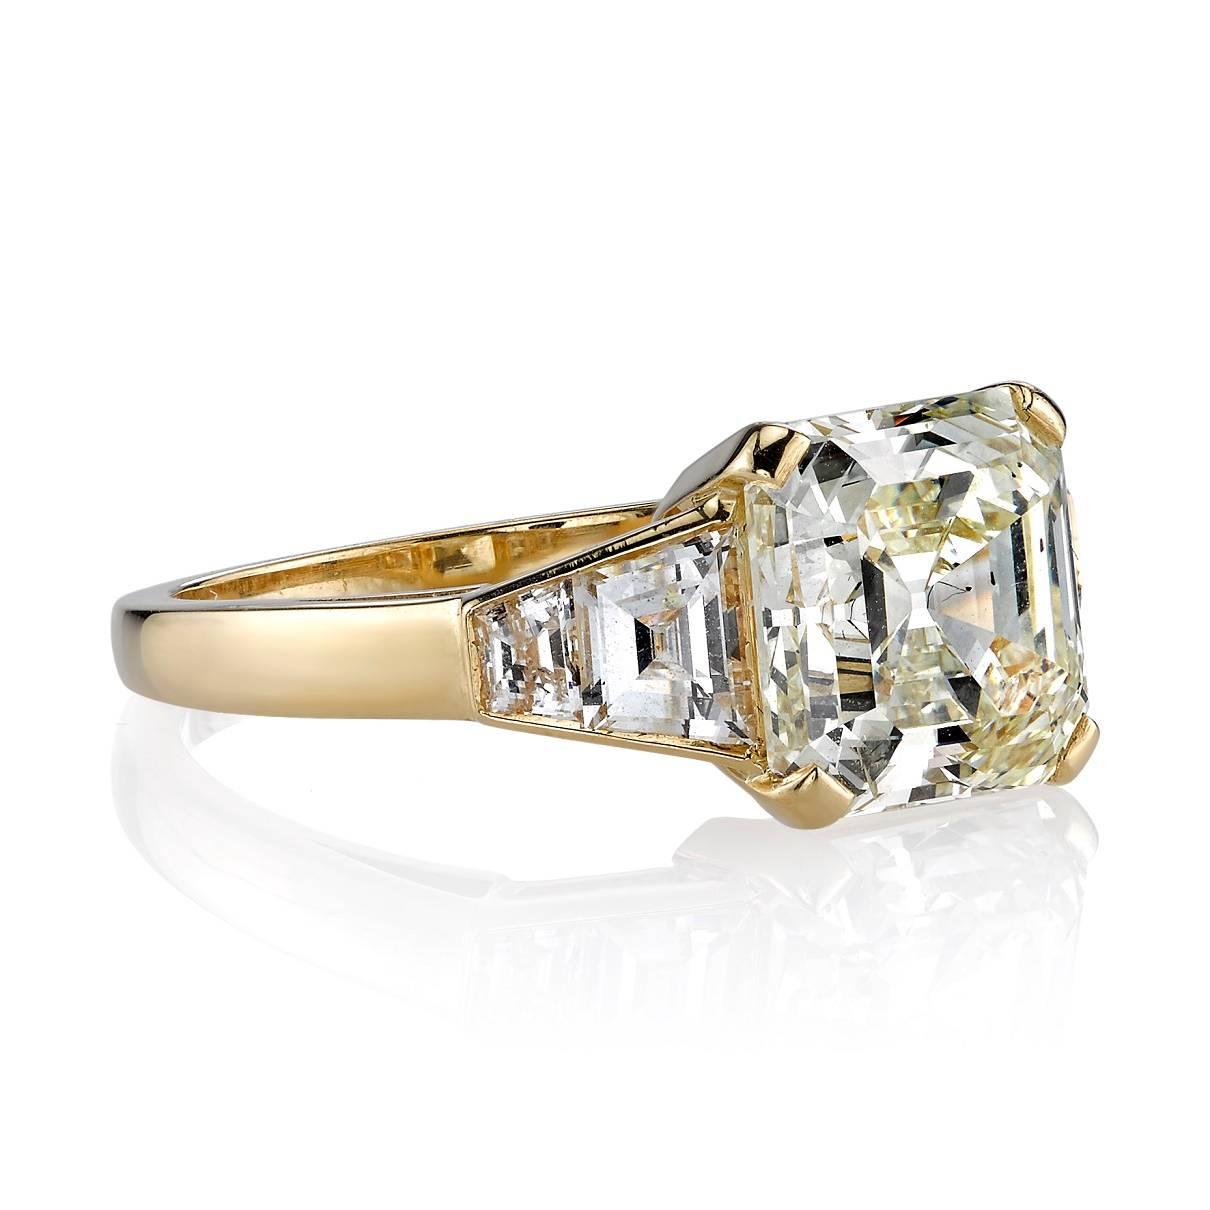 3.45ct N/SI1 Asscher cut diamond EGL certified and set in a handcrafted 18k yellow gold mounting. A clean and classic design featuring trapezoid accent diamonds.